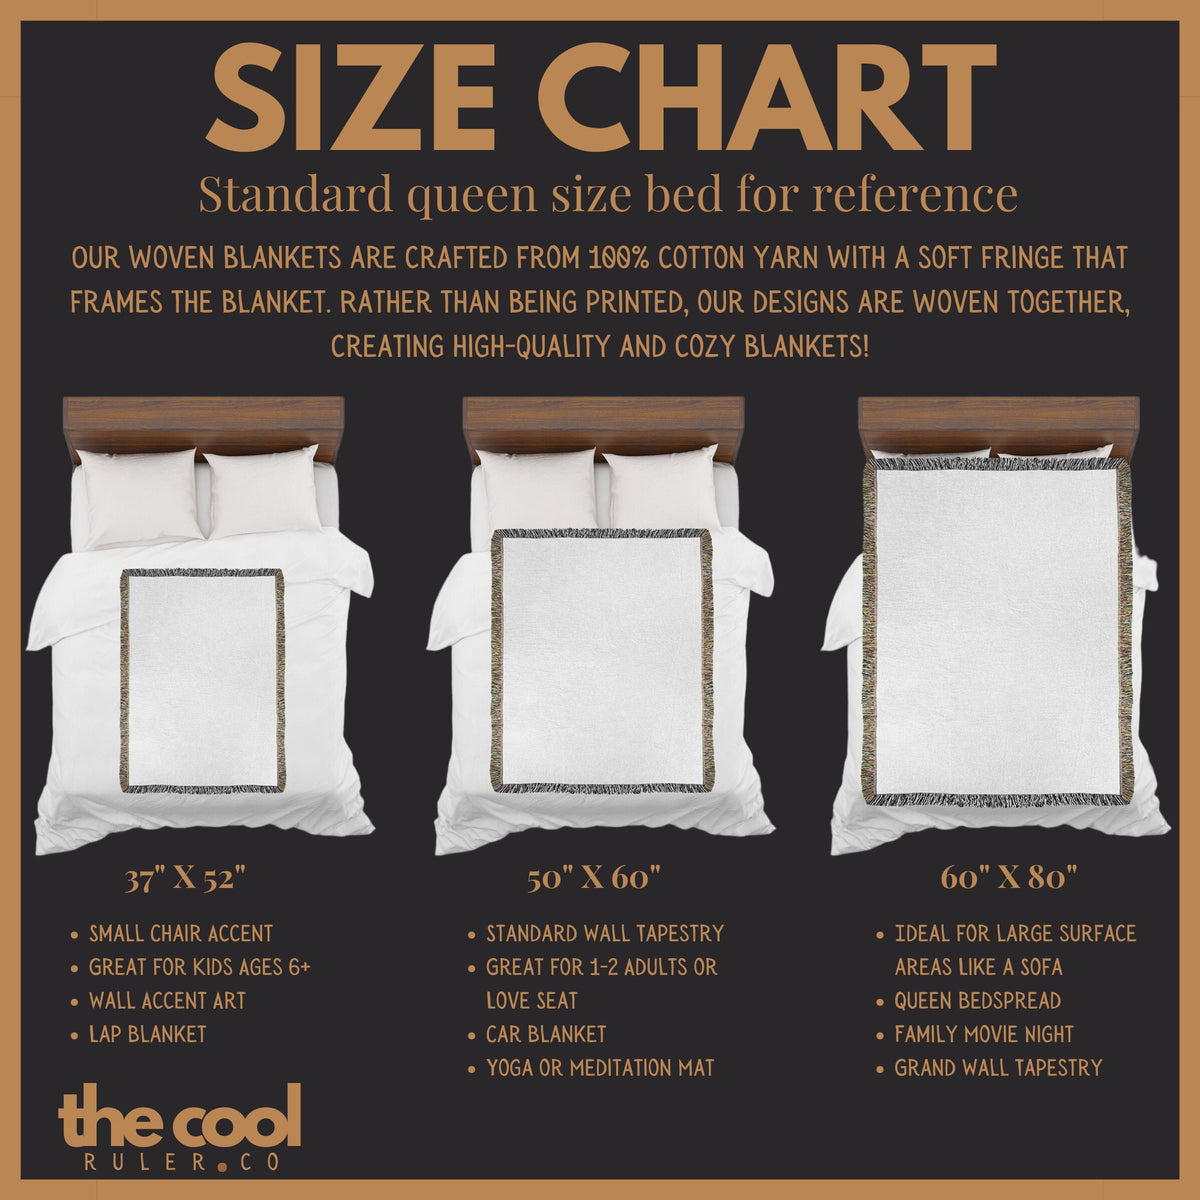 the cool bed company size chart for standard queen size beds